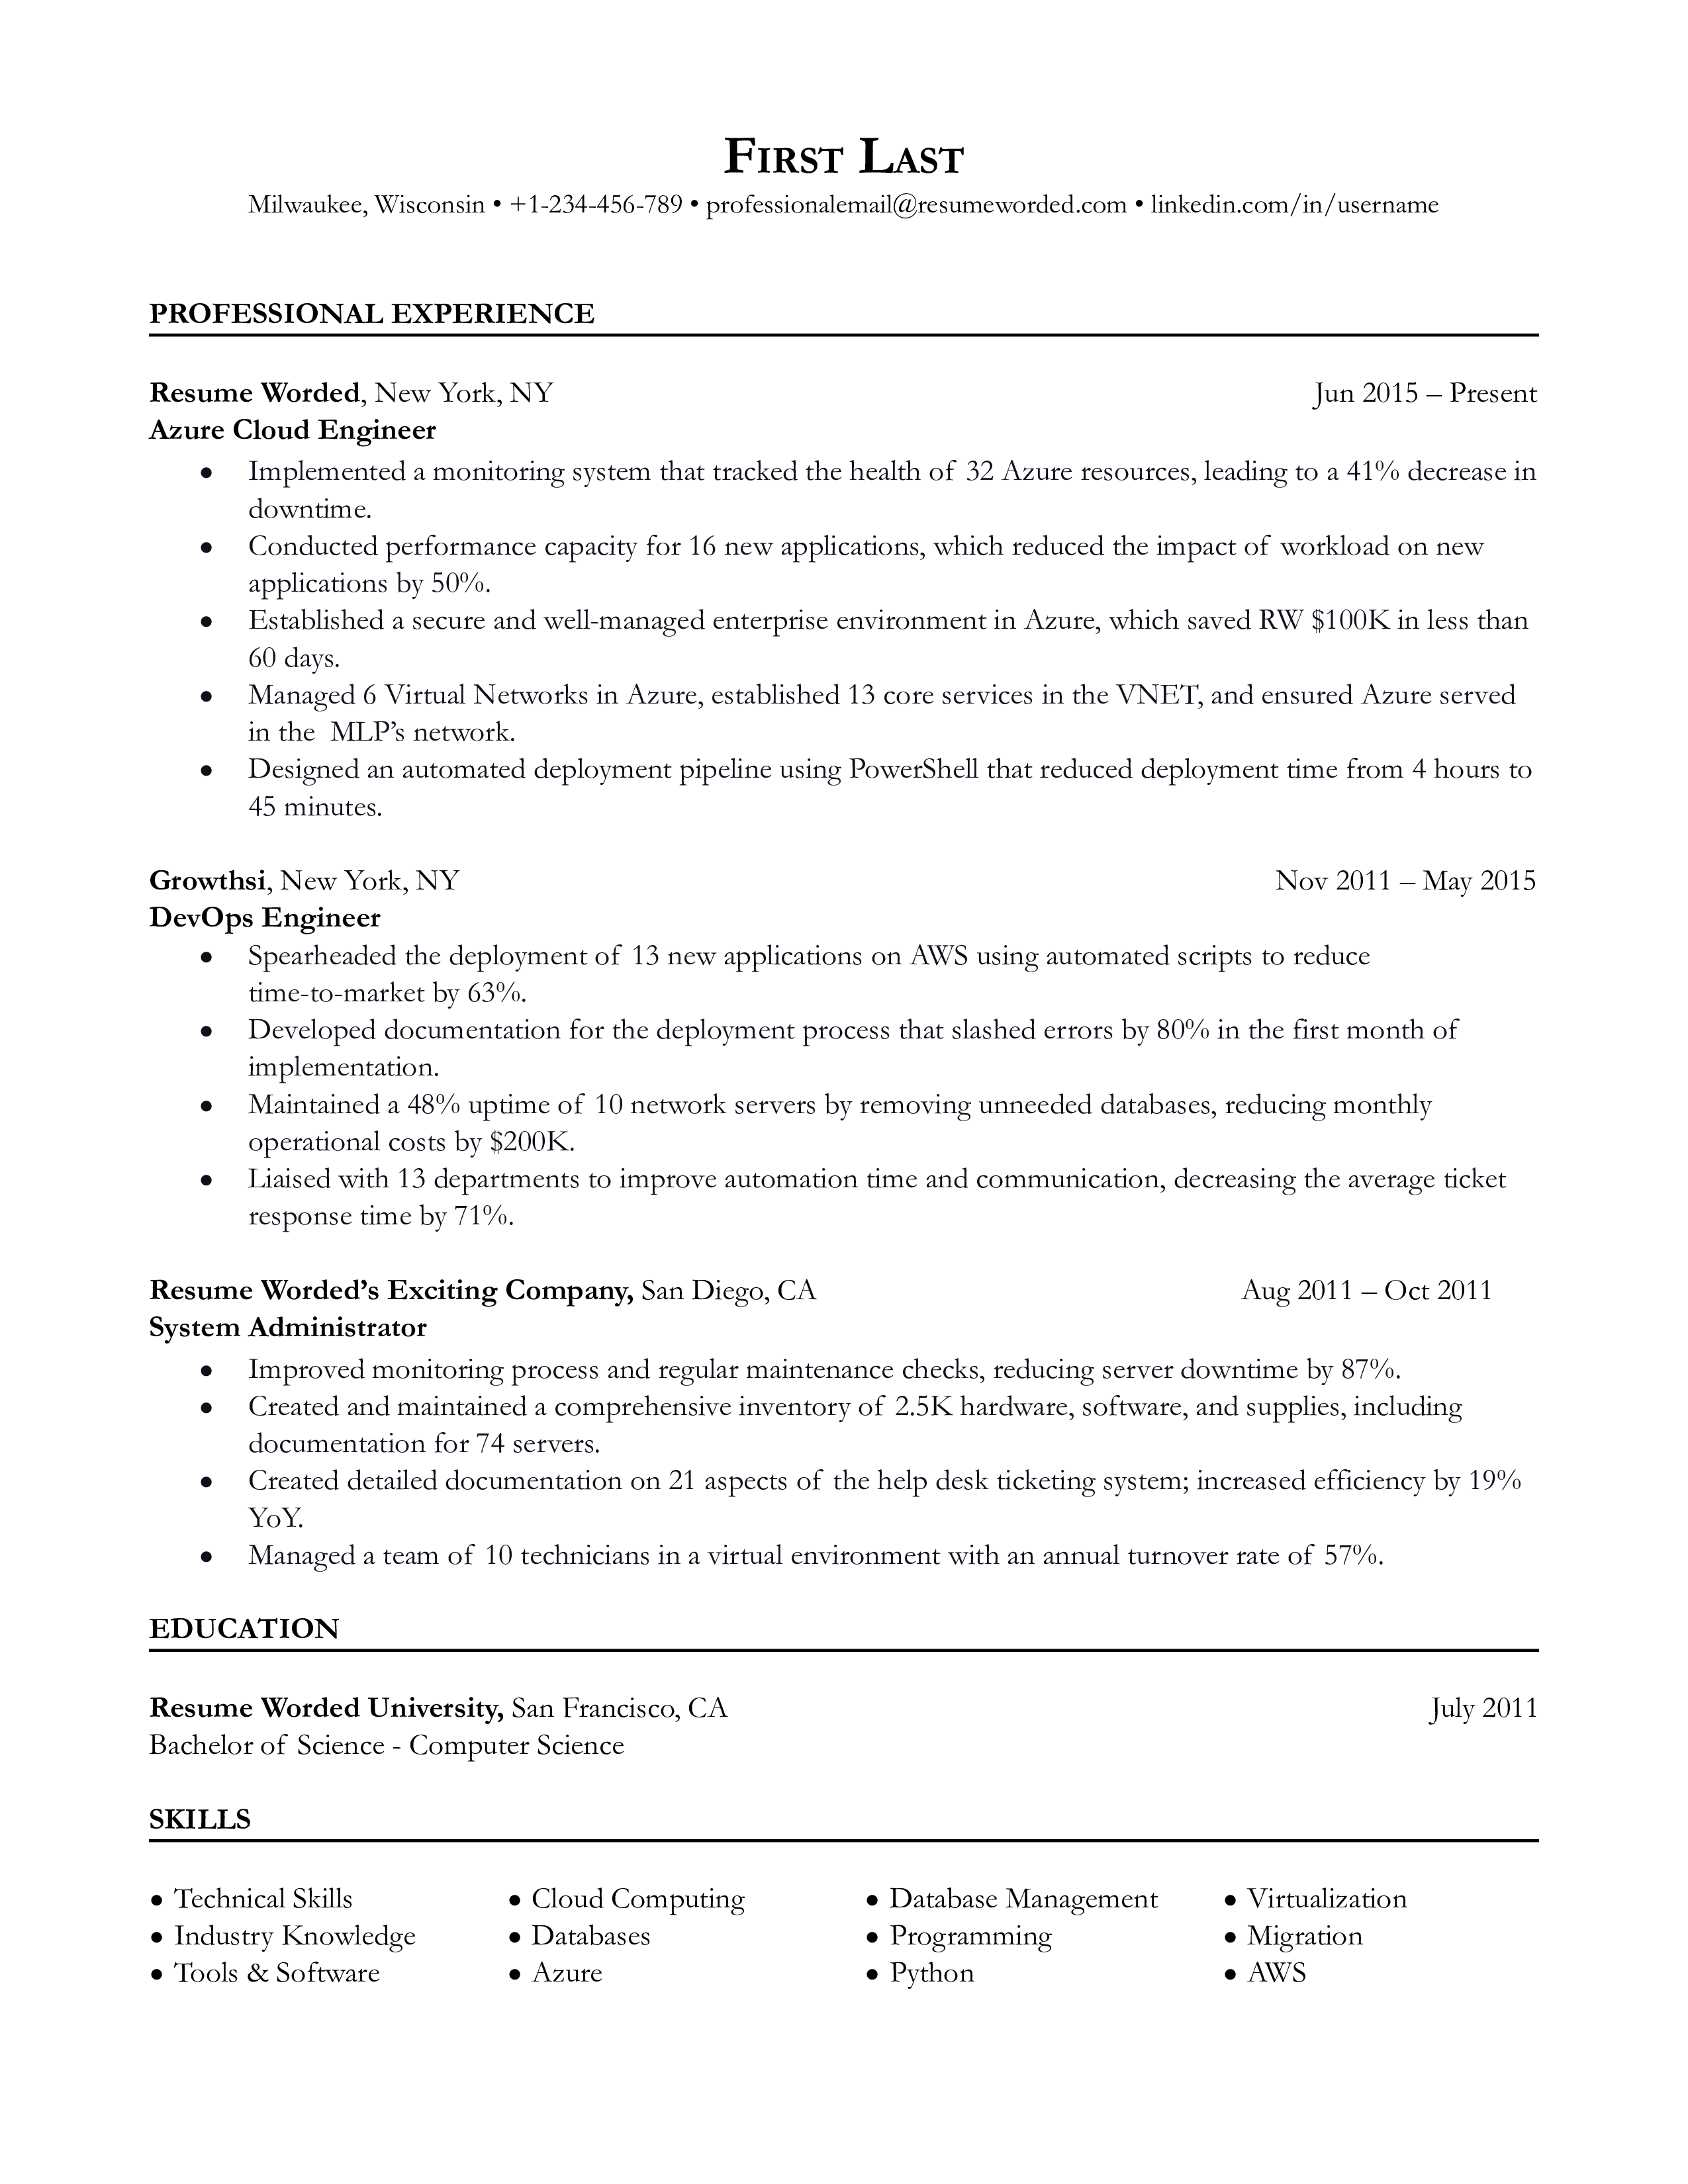 Azure Cloud Engineer resume sample and recommendations